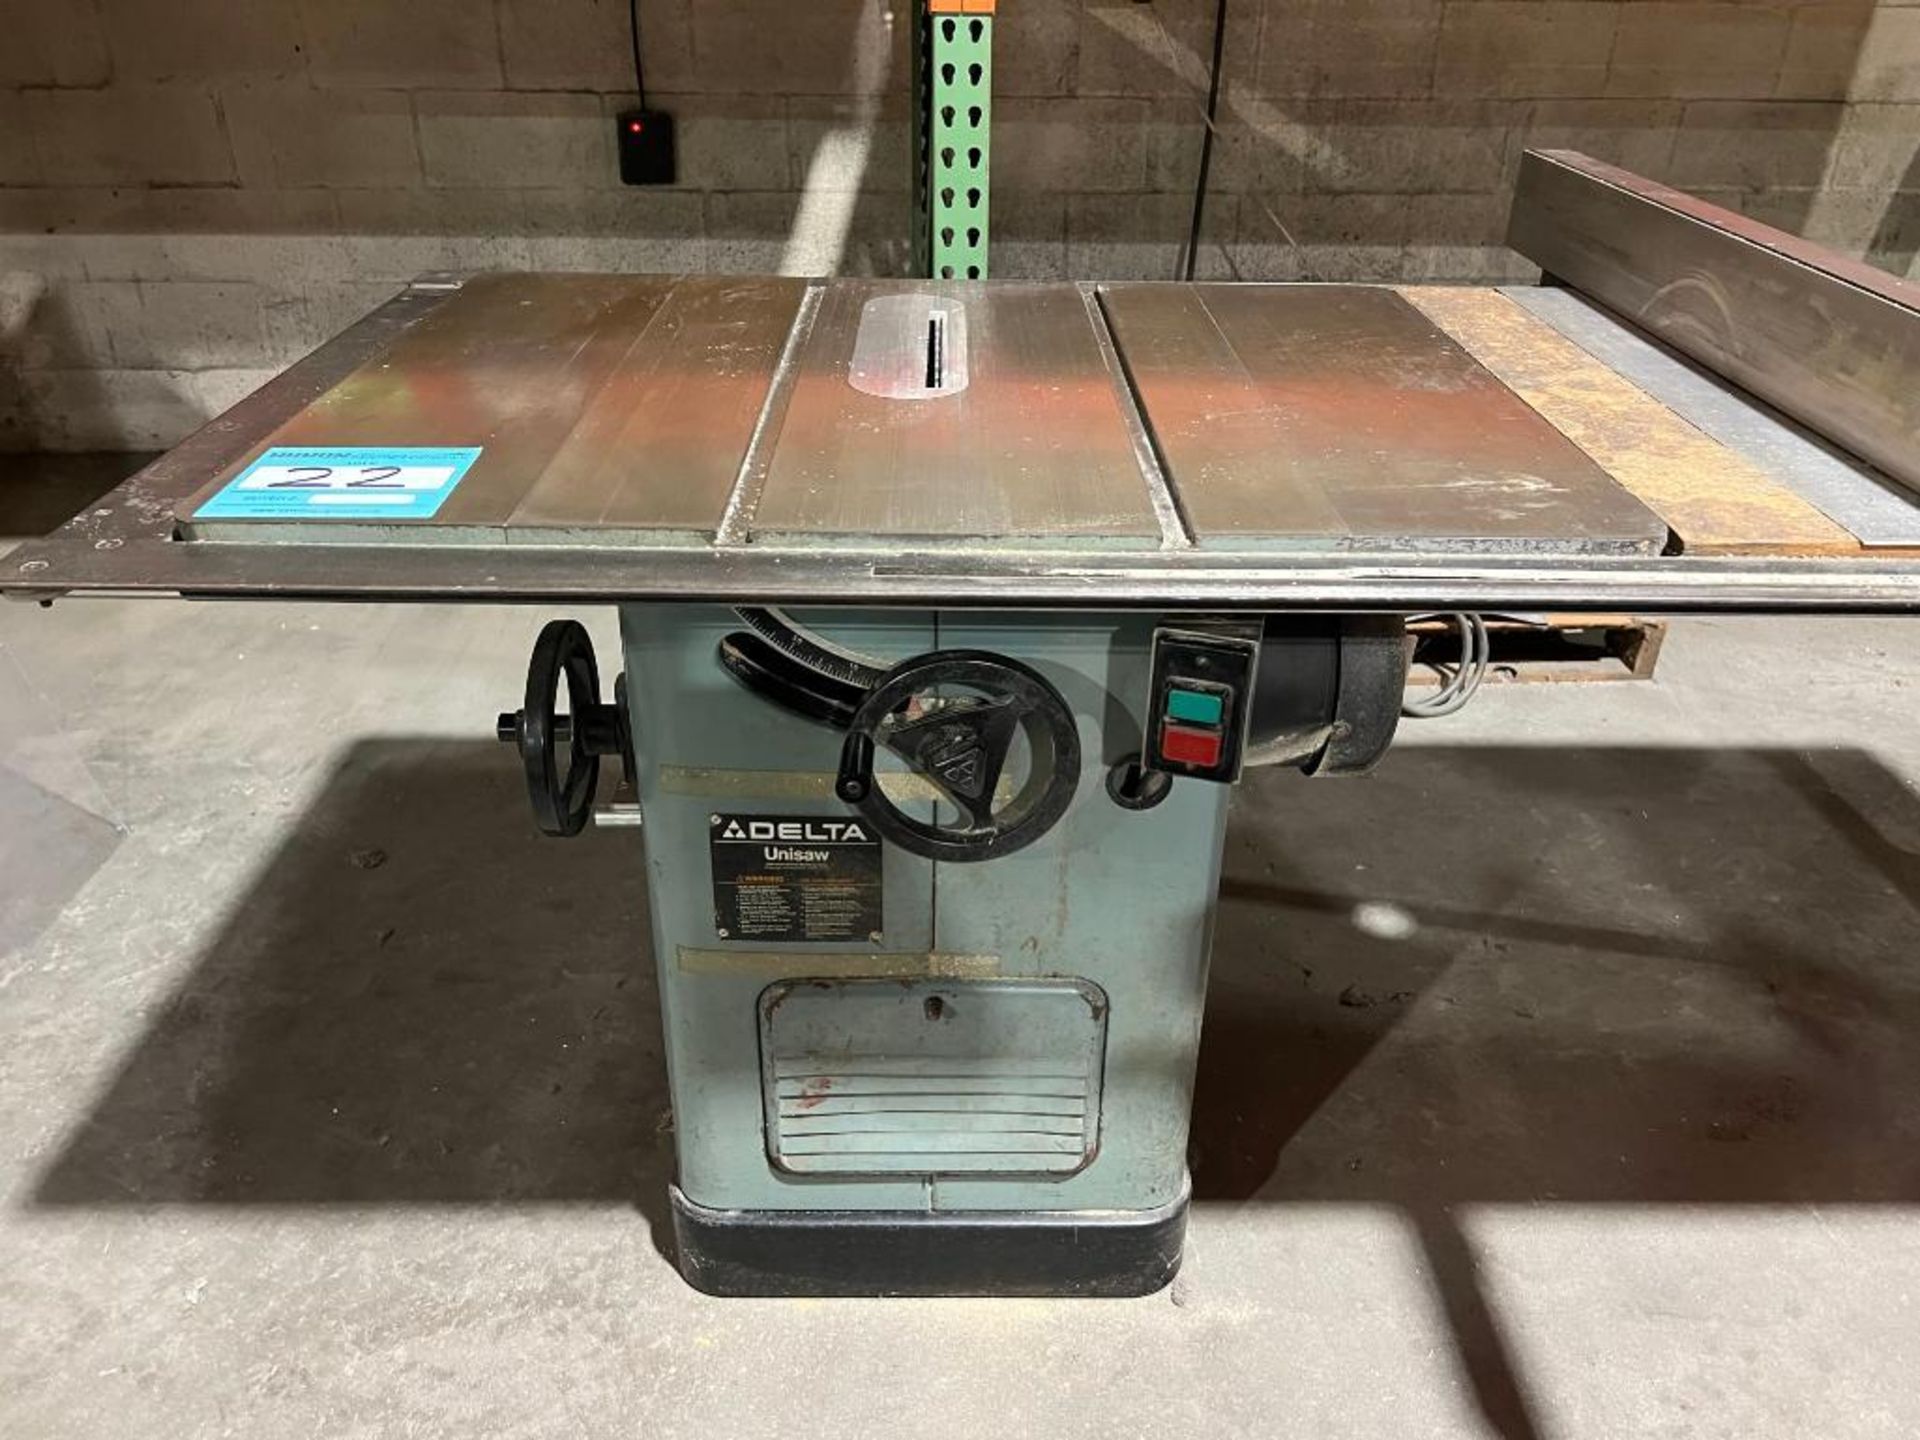 Delta Unisaw Table Saw, S/N 86B00540, 3 Phase Motor - Image 2 of 19